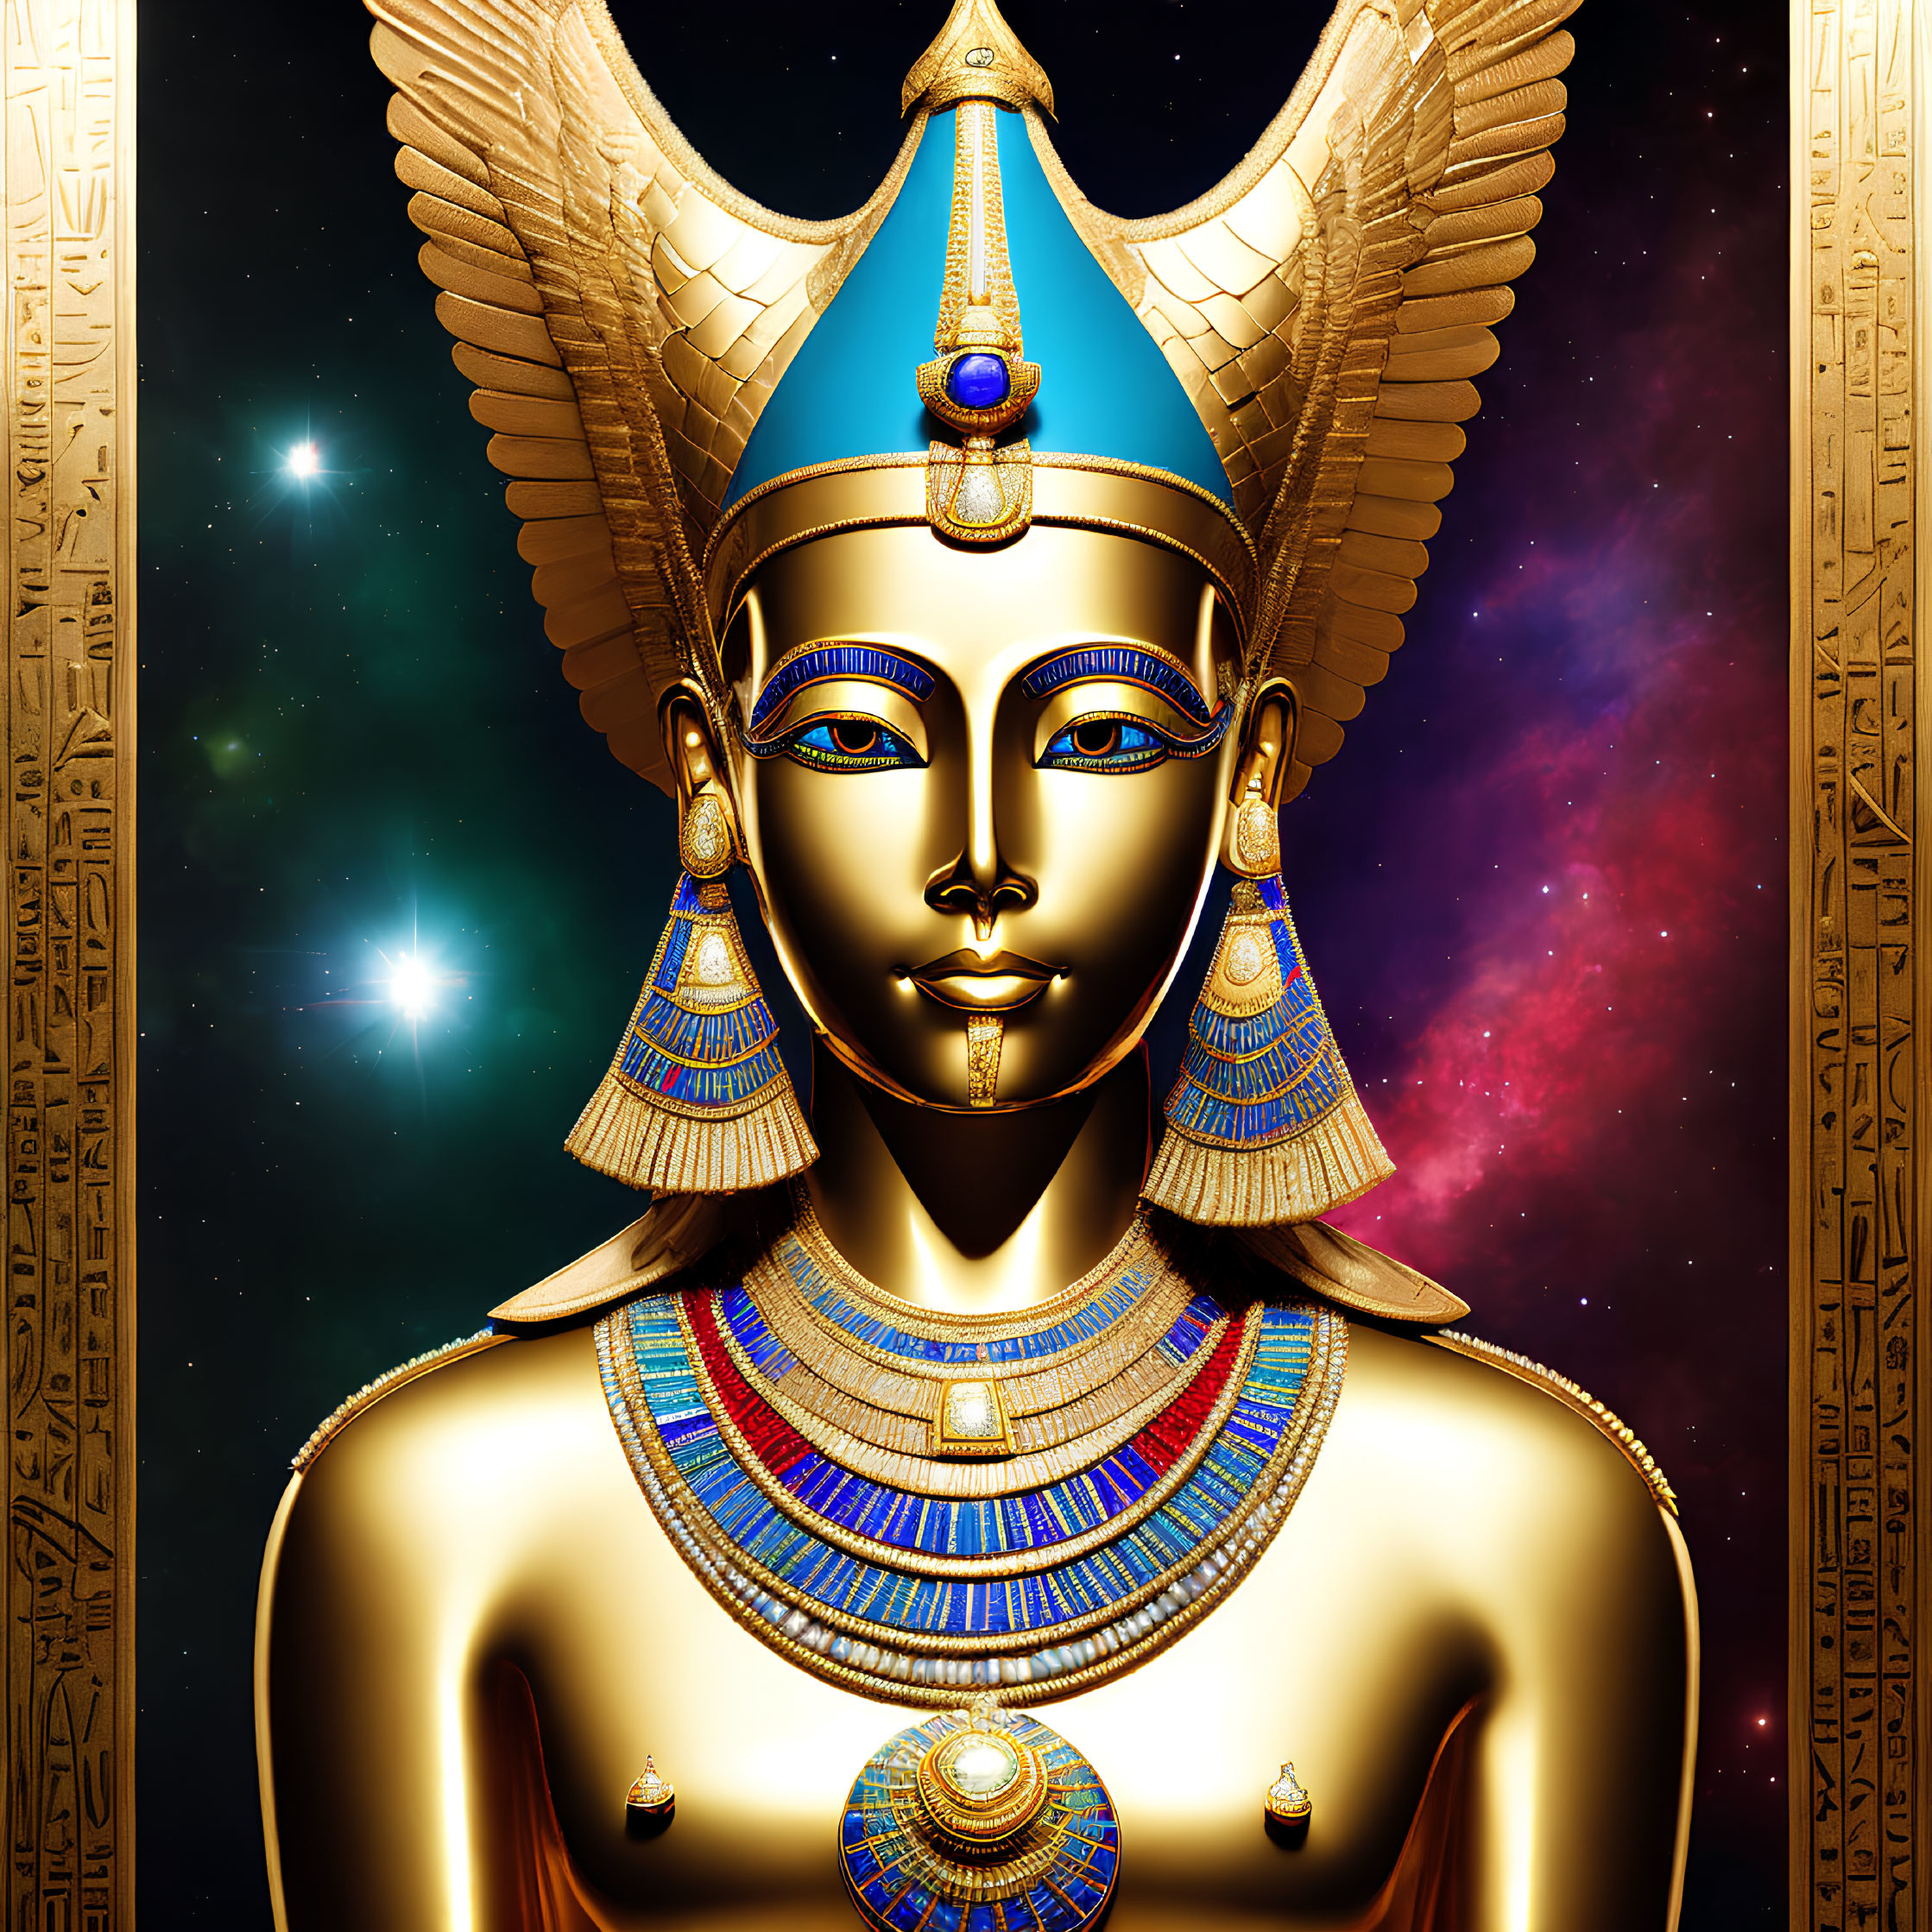 Egyptian Pharaoh Artwork with Traditional Headdress and Cosmic Background